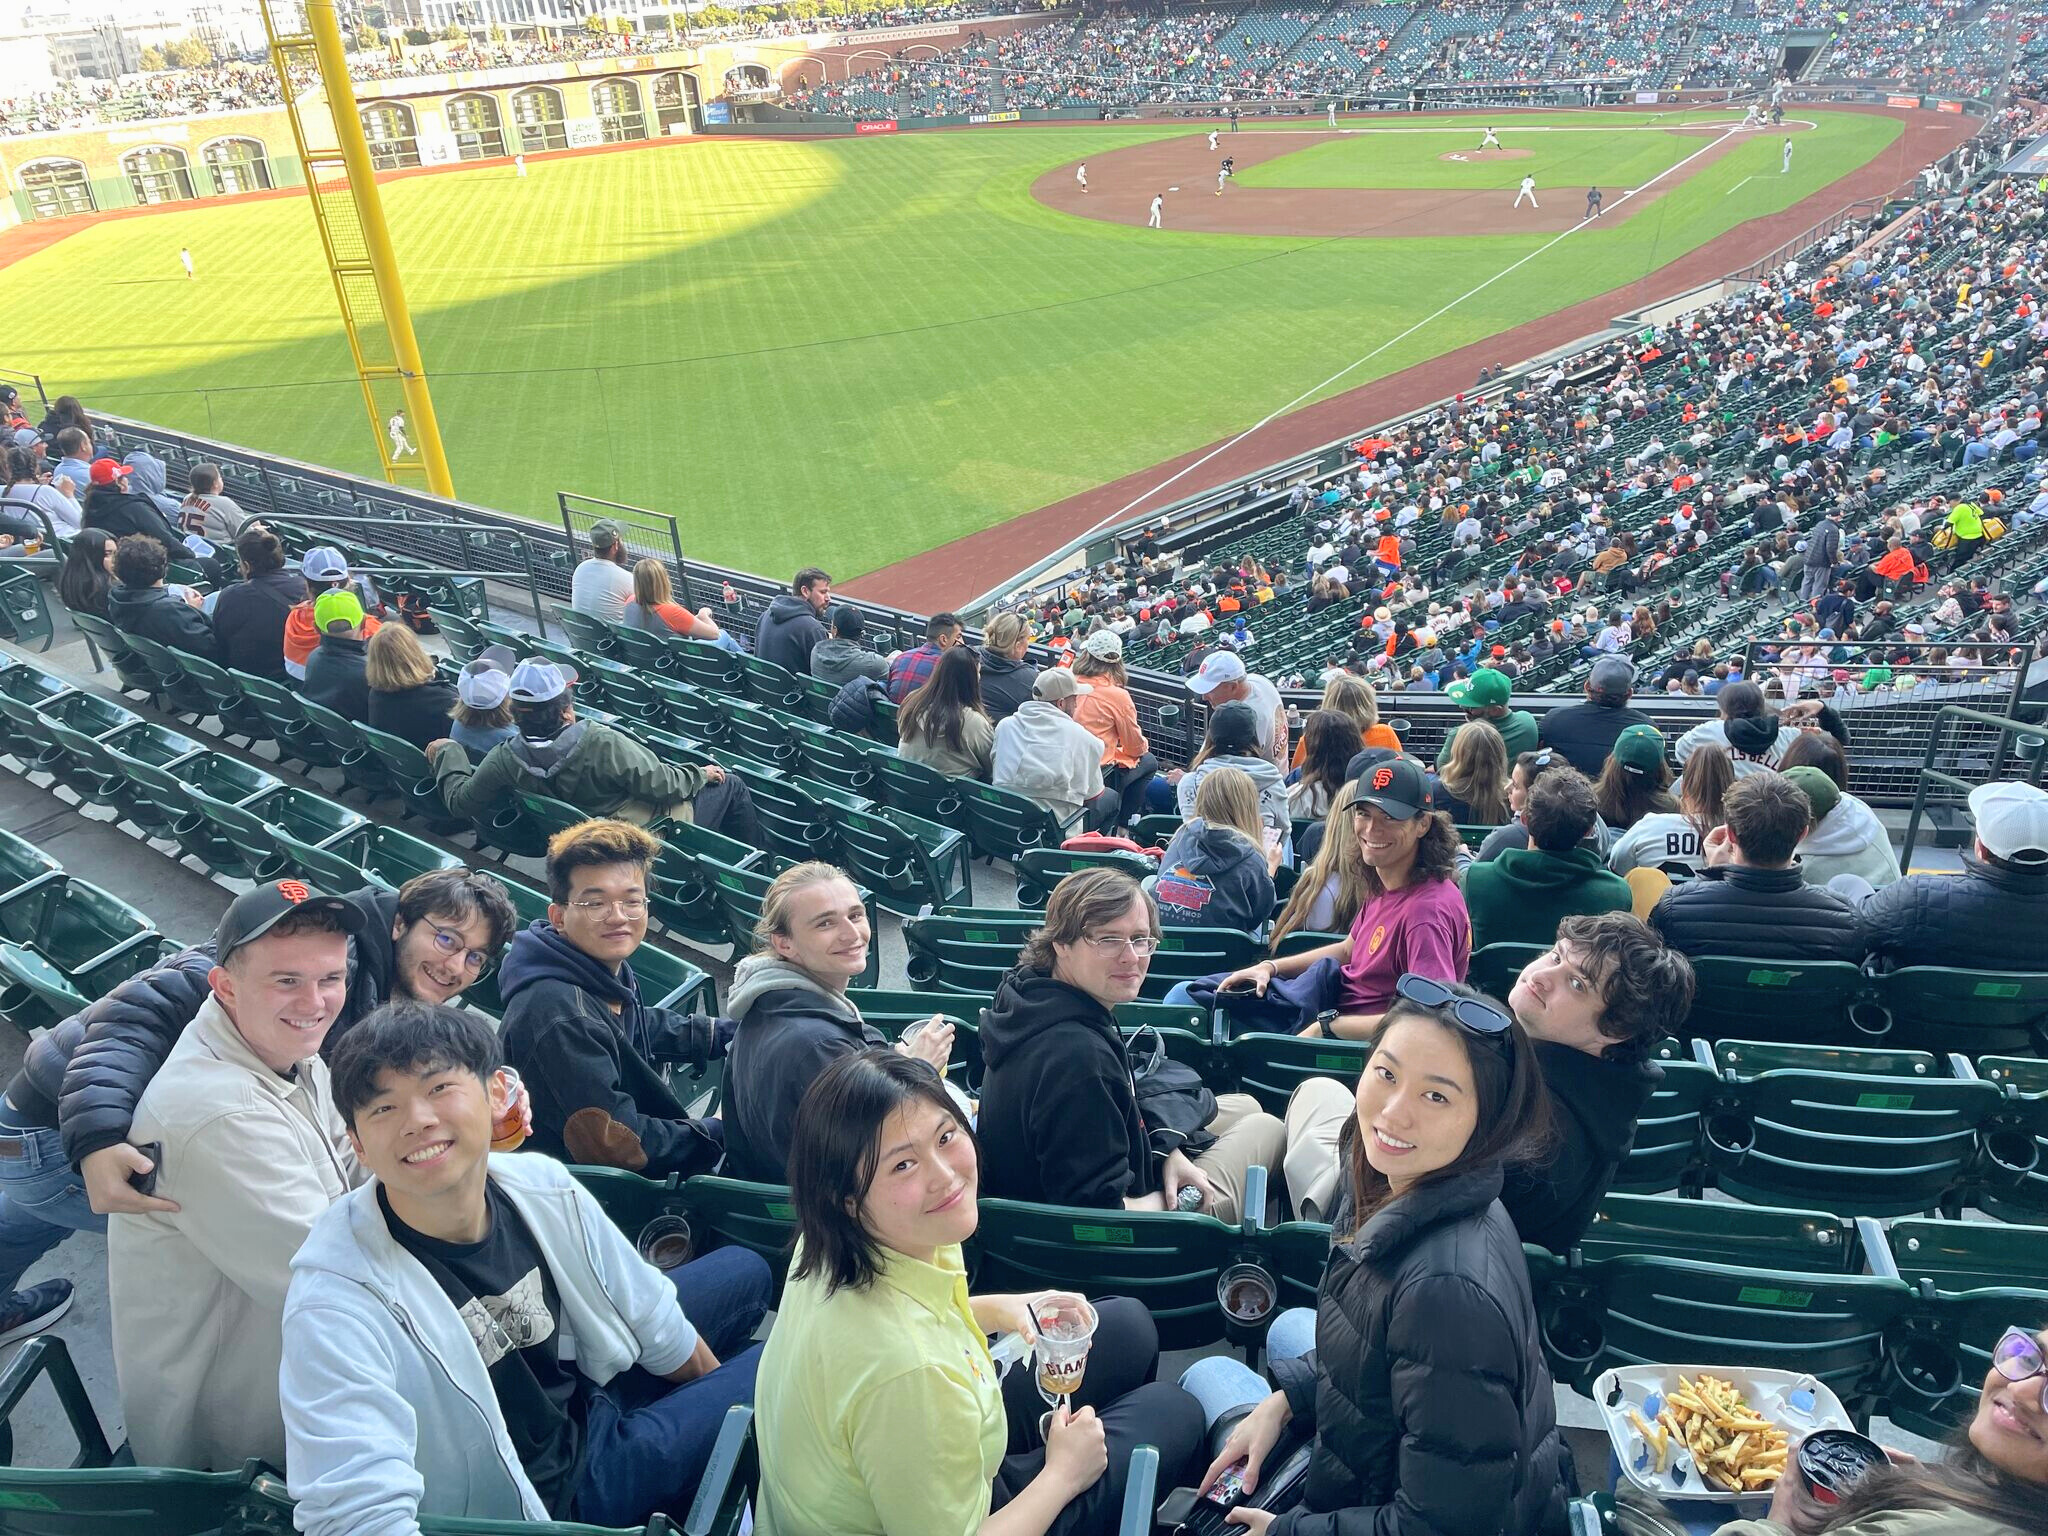 2K grad program members from both the US and Dublin pose for a photo at a baseball game